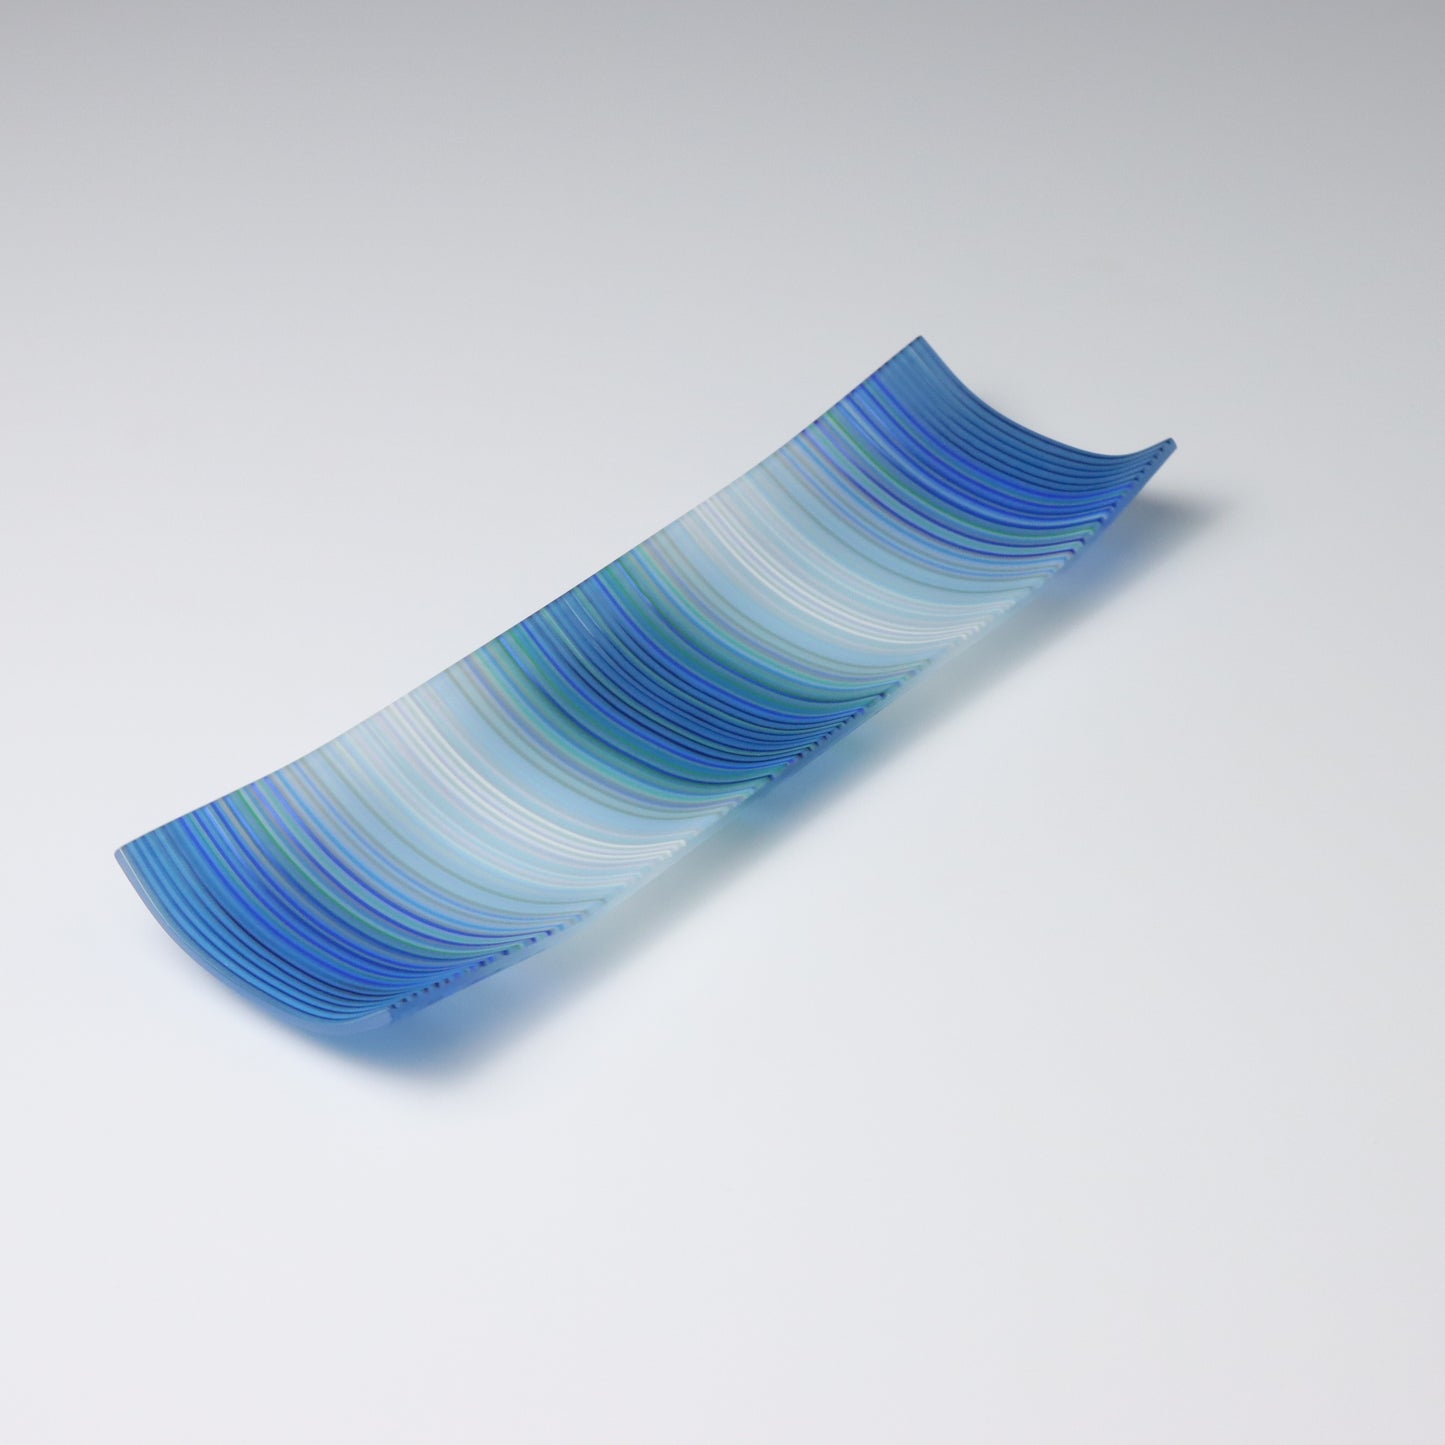 A decorative shallow rectangular boat shaped glass plate with raised corners and a  colourful ColourWave stripe patterns showing key colours of blue, green and white